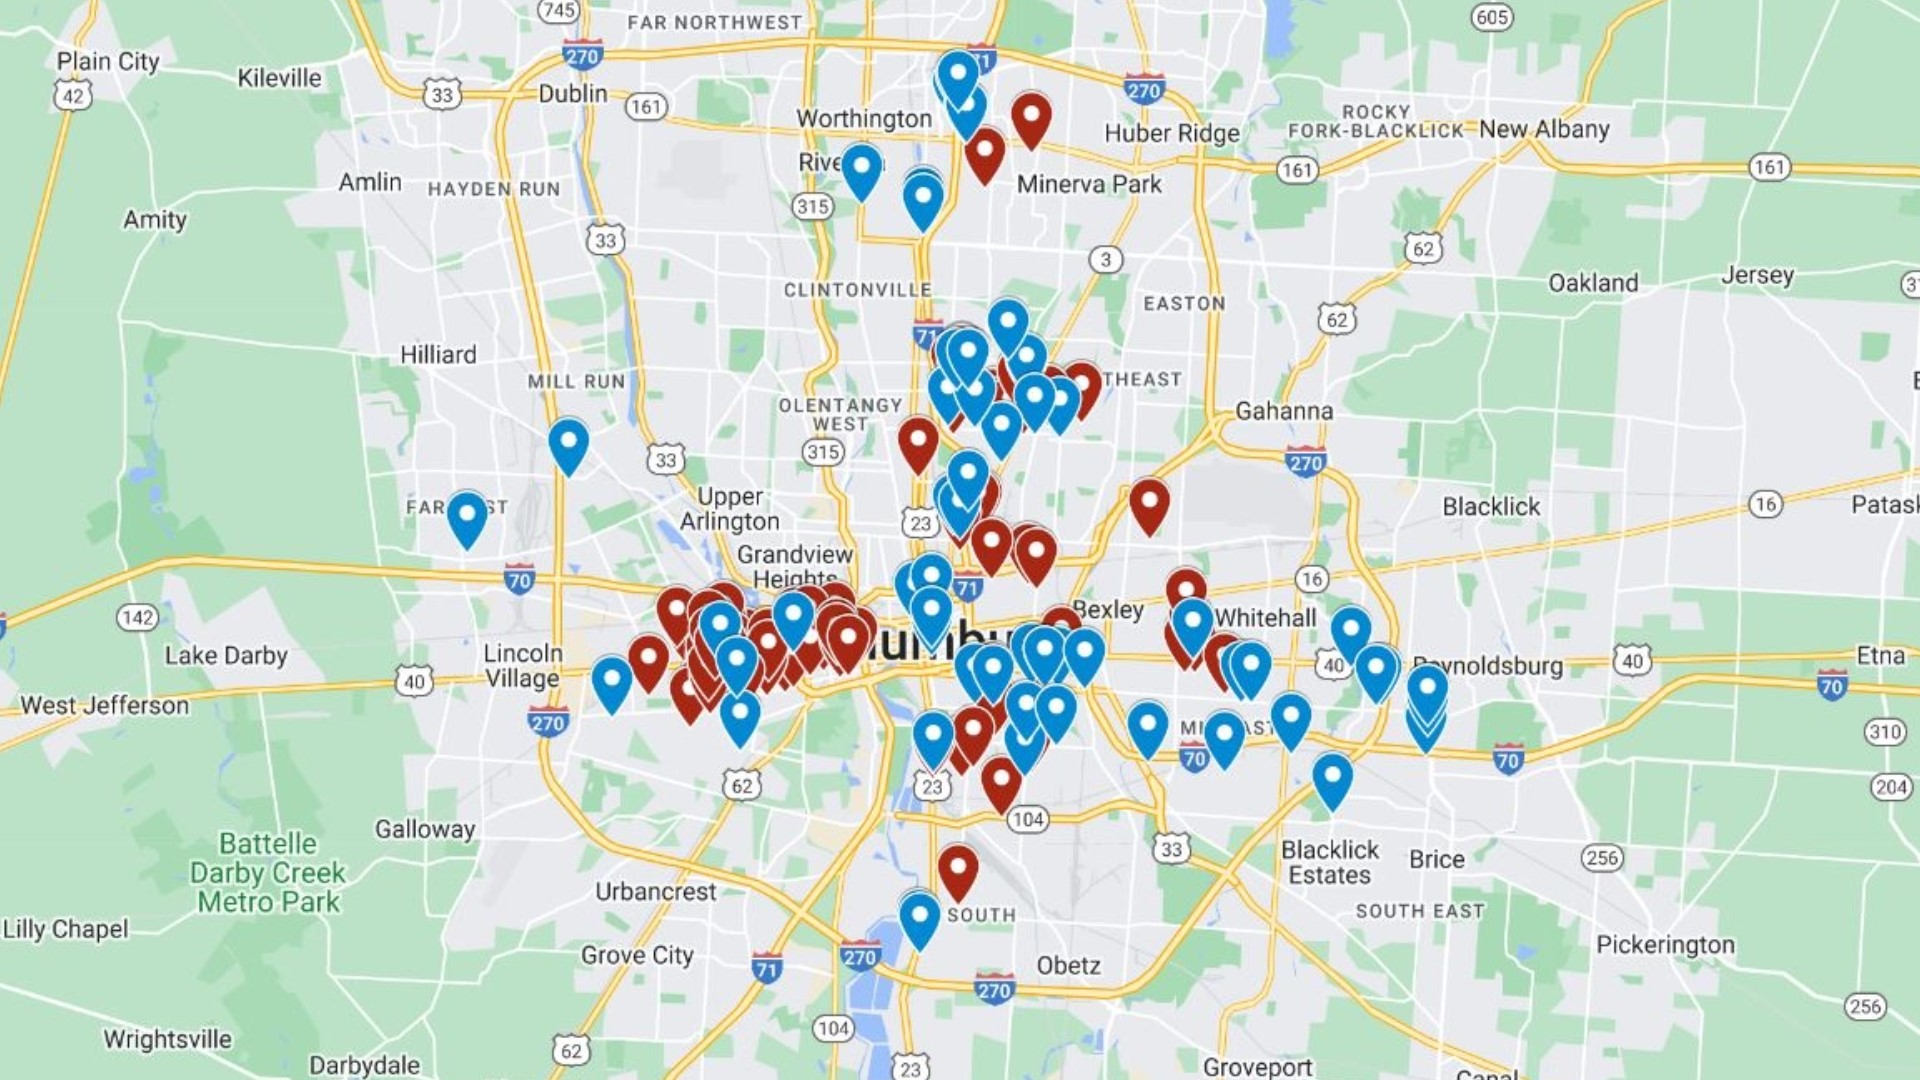 Since January 2019, more than 150 properties in Columbus were given court orders to shut down.